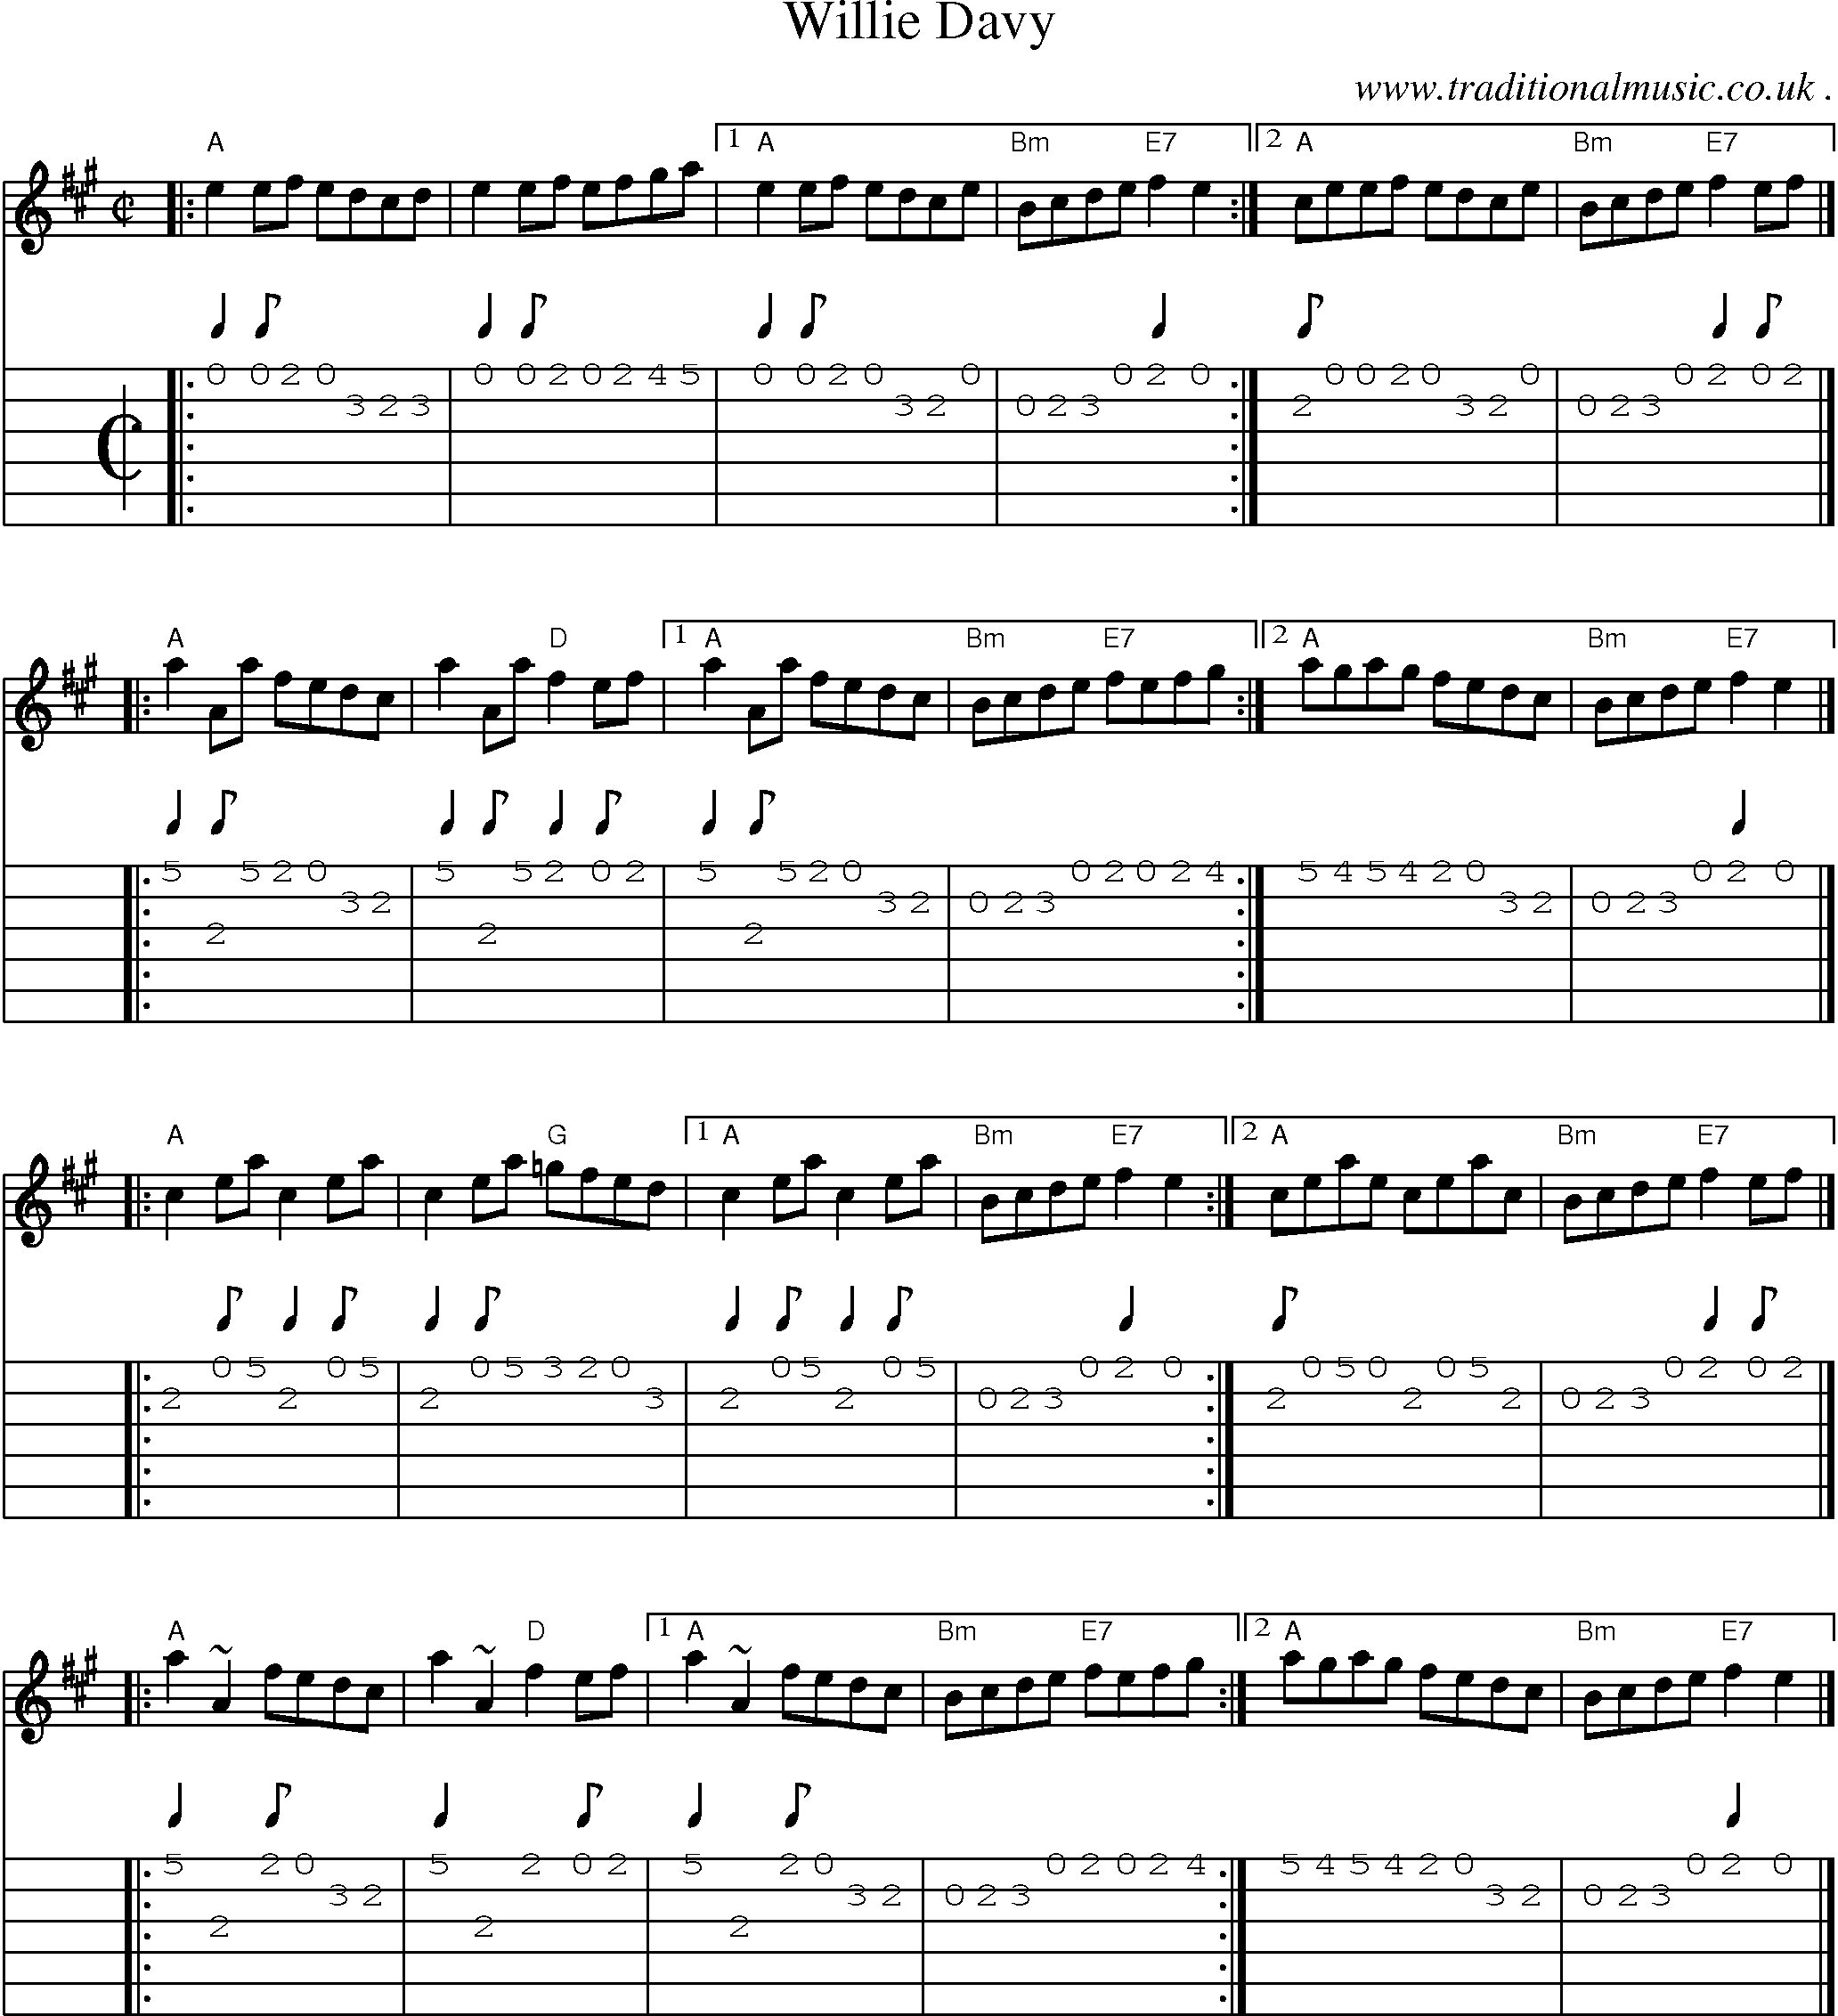 Sheet-music  score, Chords and Guitar Tabs for Willie Davy